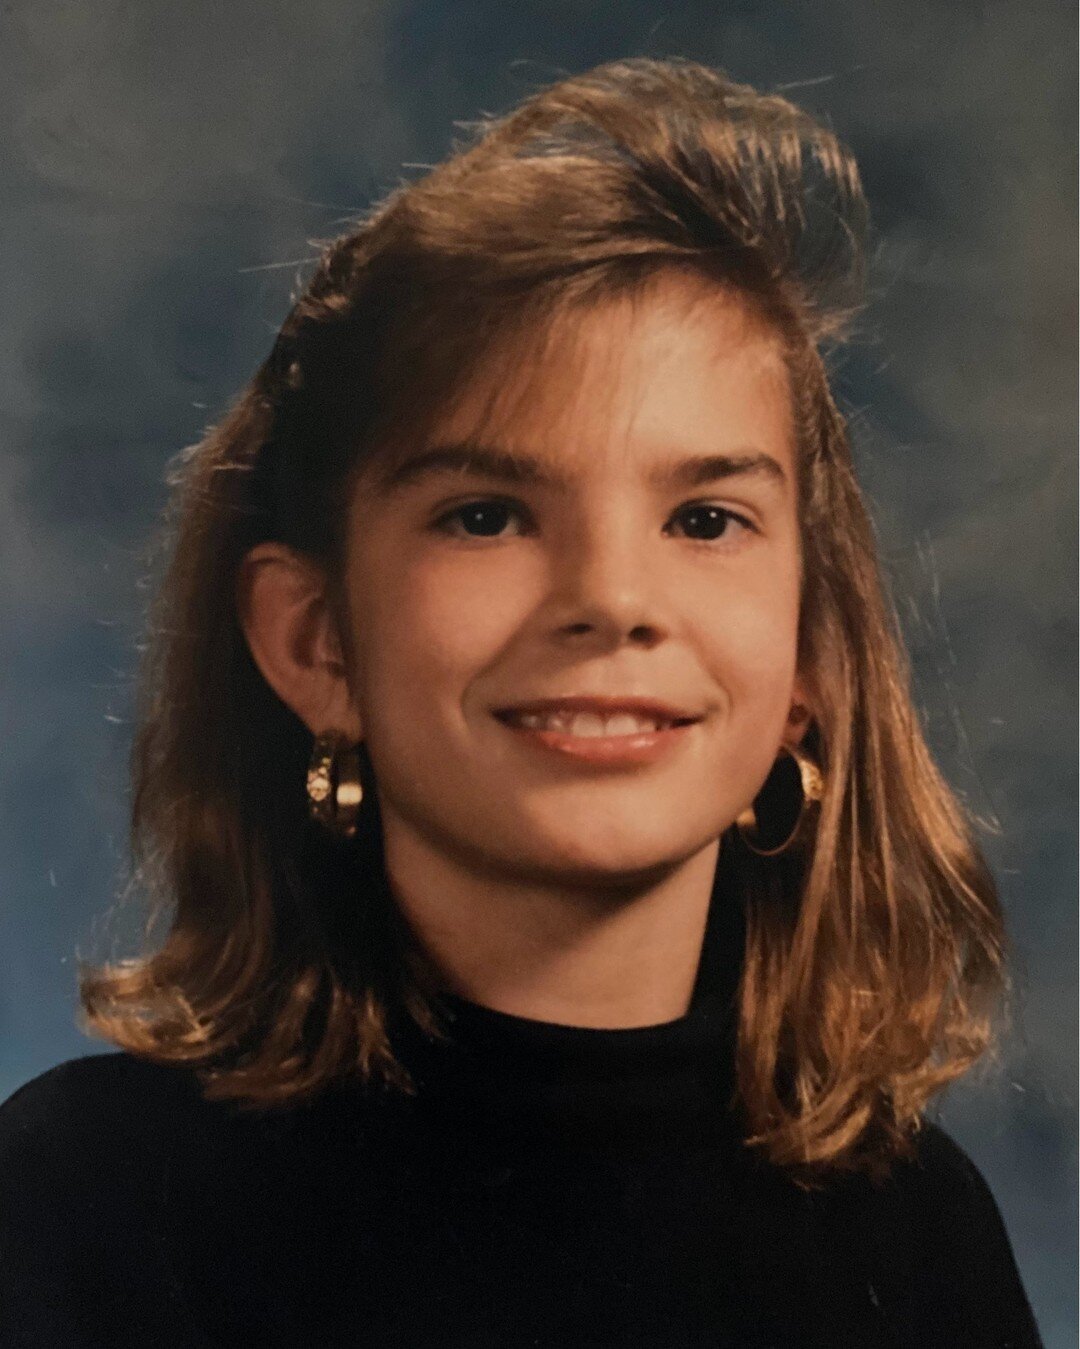 Welcome to #ThrowbackThursday (yes this will be a recurring segment on my page)

This is me - 5th or 6th grade - I'm pretty obsessed with those bangs.